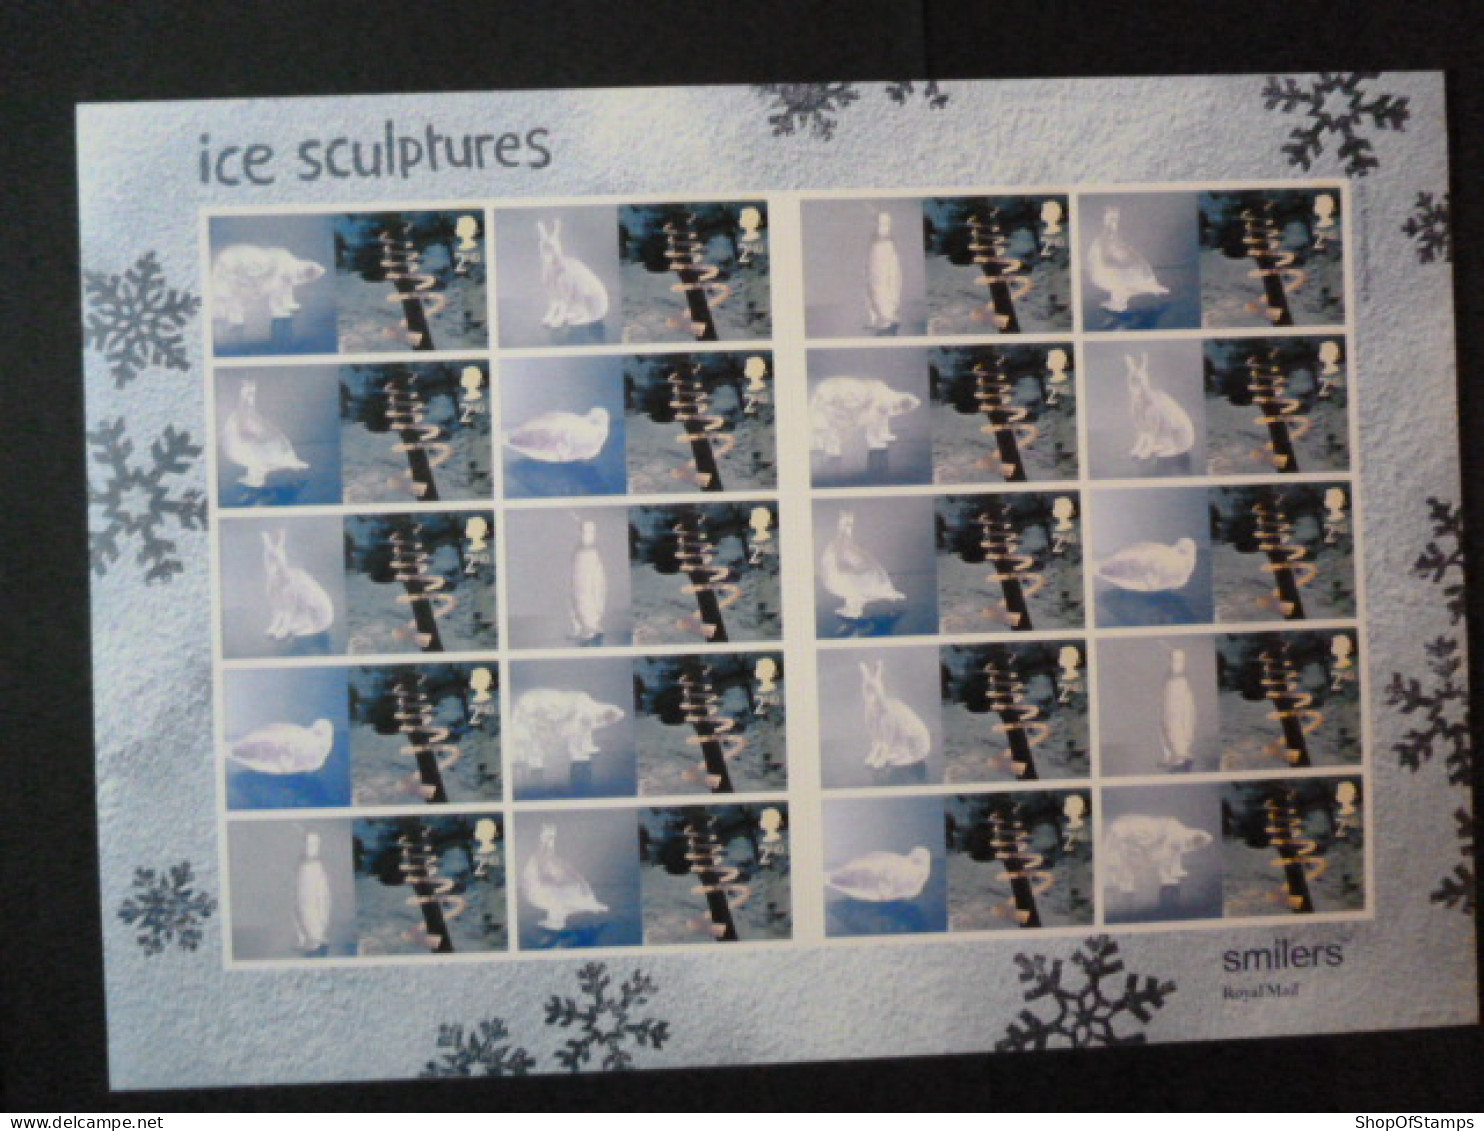 GREAT BRITAIN SG 2410 CHRISTMAS ICE SCULPTURES 20 STAMPS SMILER SHEET WITH GUTTERS & LABELS - Hojas & Múltiples